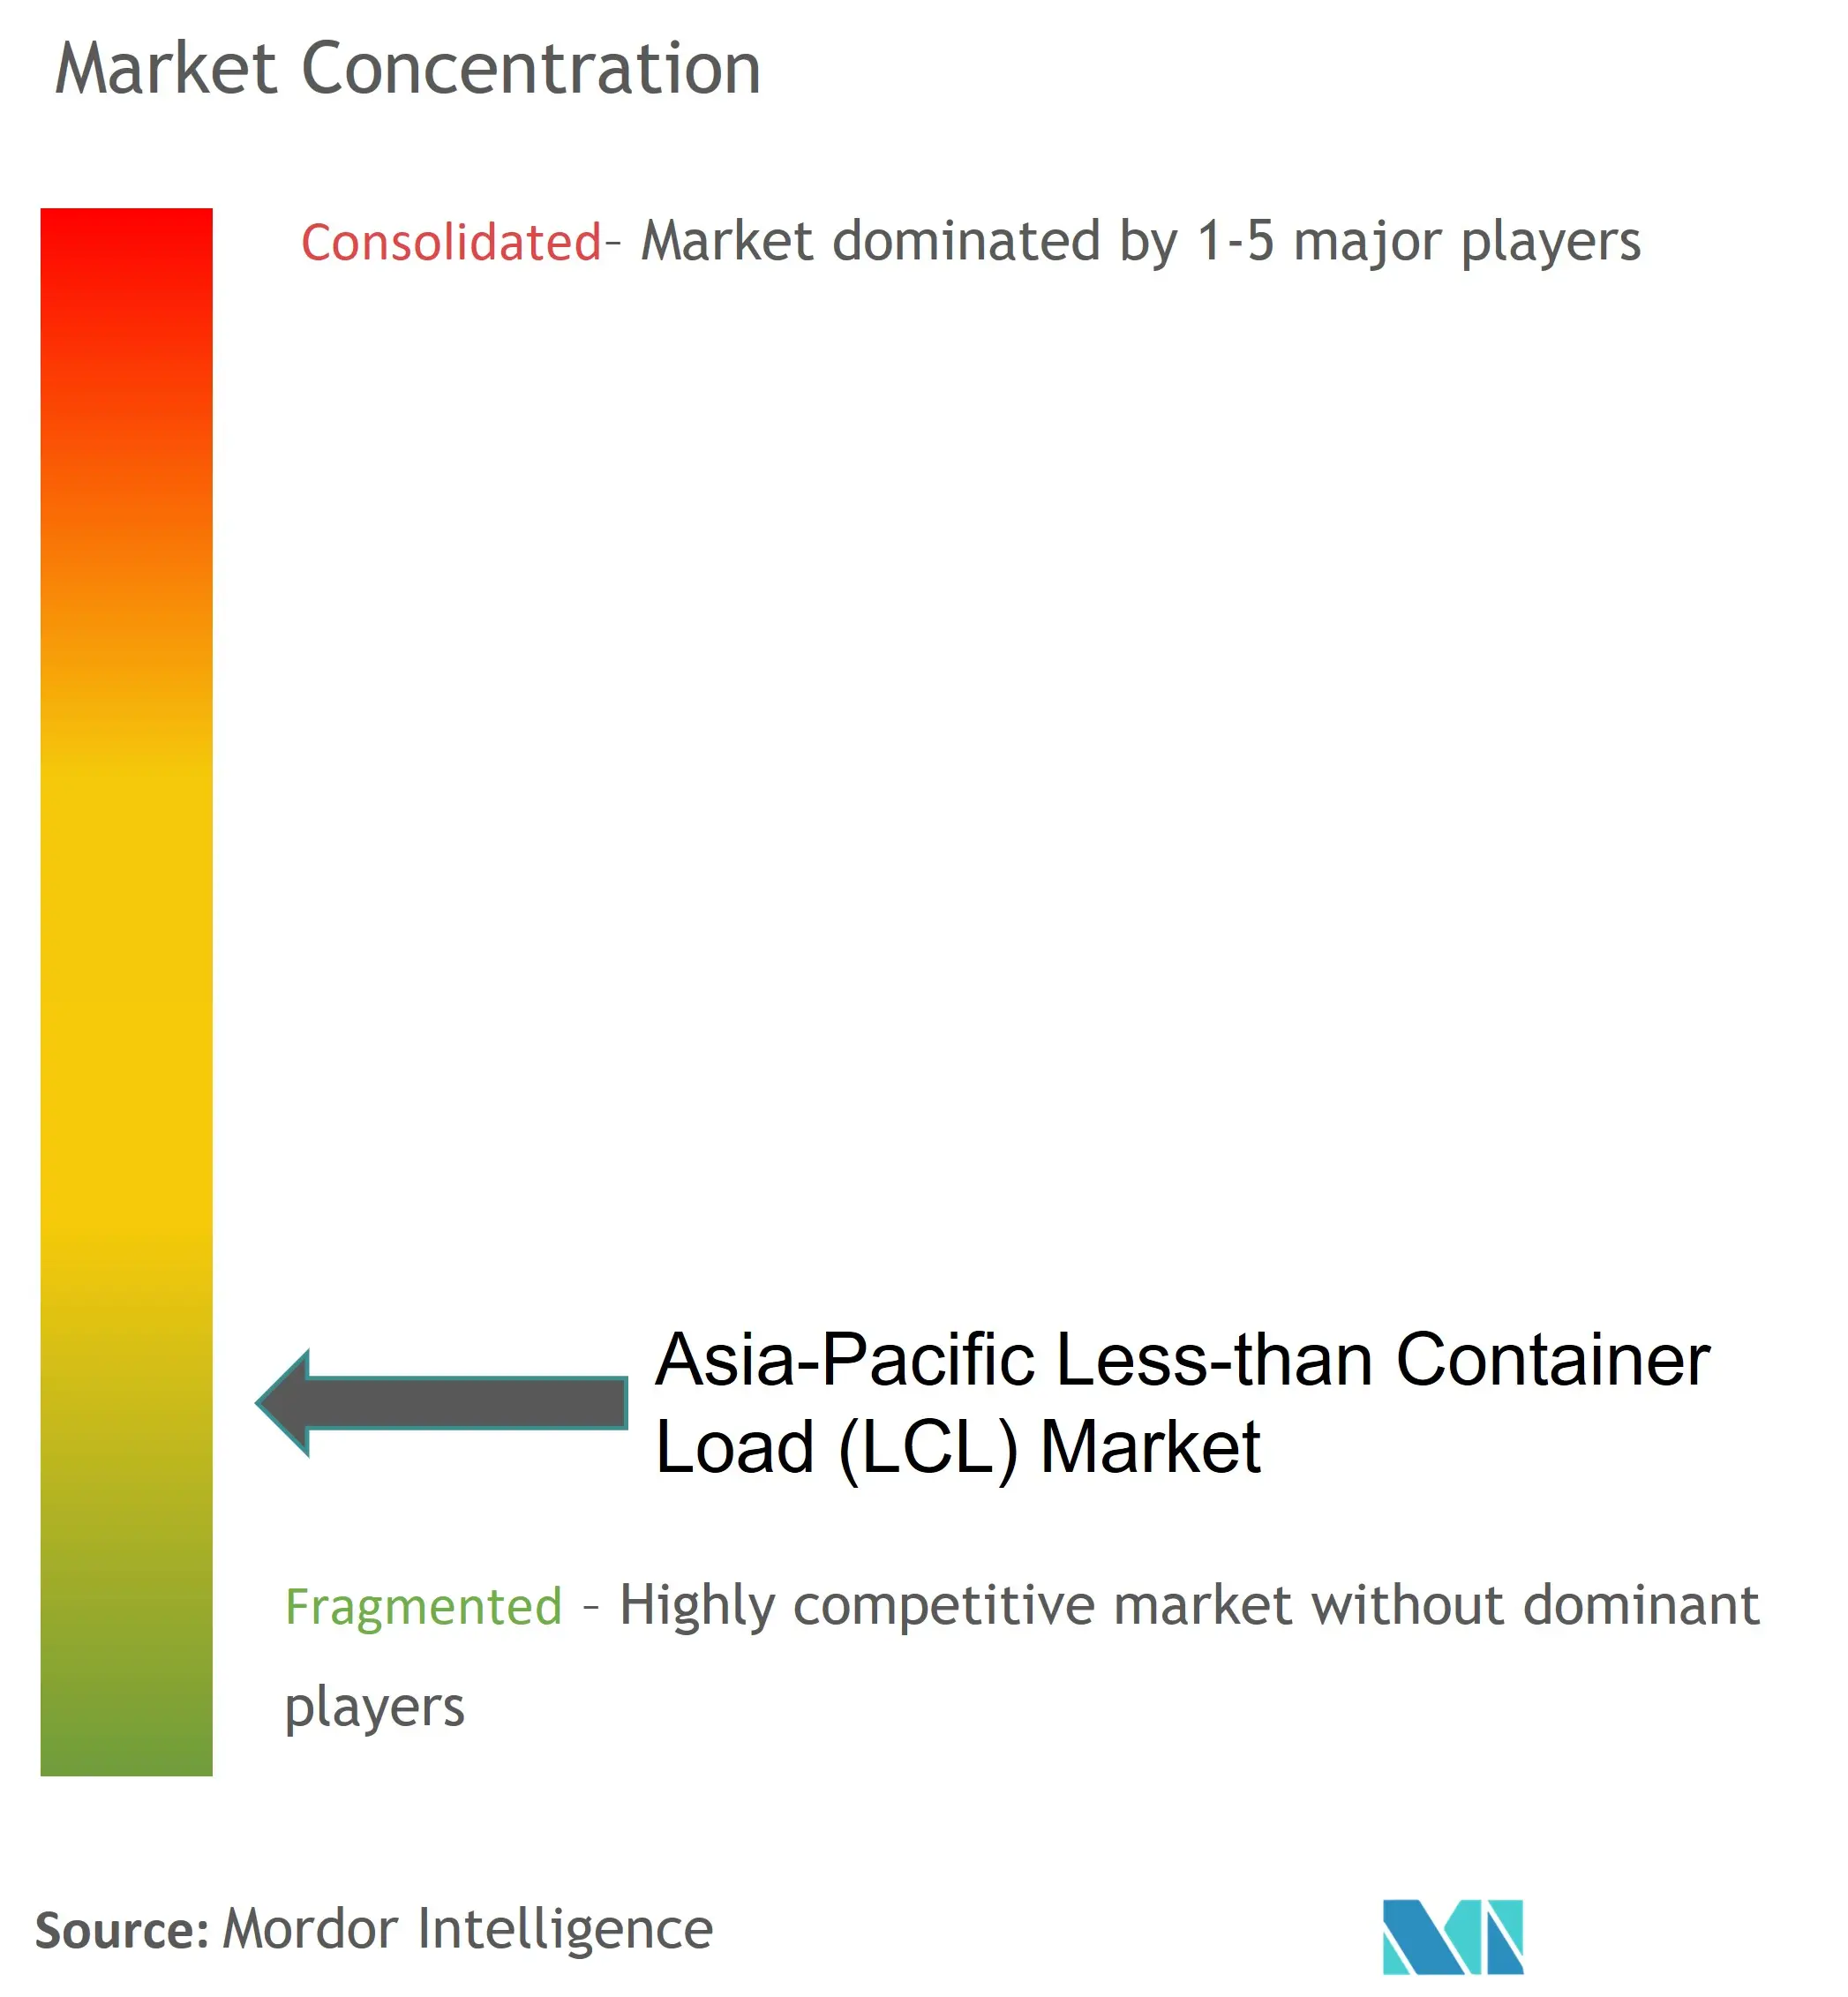 Asia-Pacific Less-than Container Load (LCL) Market Concentration